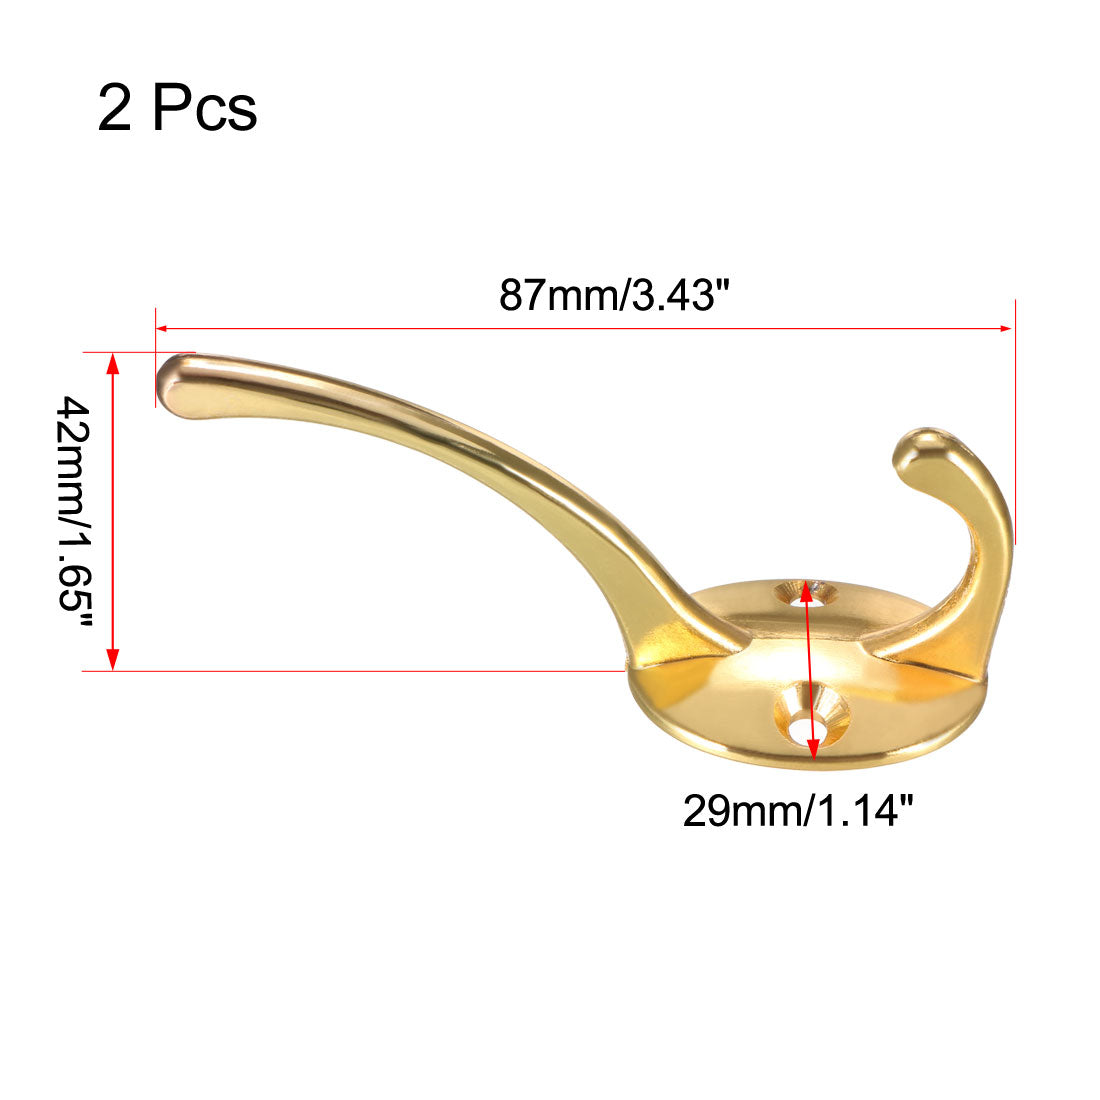 uxcell Uxcell Dual Prong Coat Hooks Wall Mounted Retro Double Hooks Utility Gold Hook for Coat Scarf Bag Towel Key Cap Cup Hat 87mm x 29mm x 42mm 2pcs